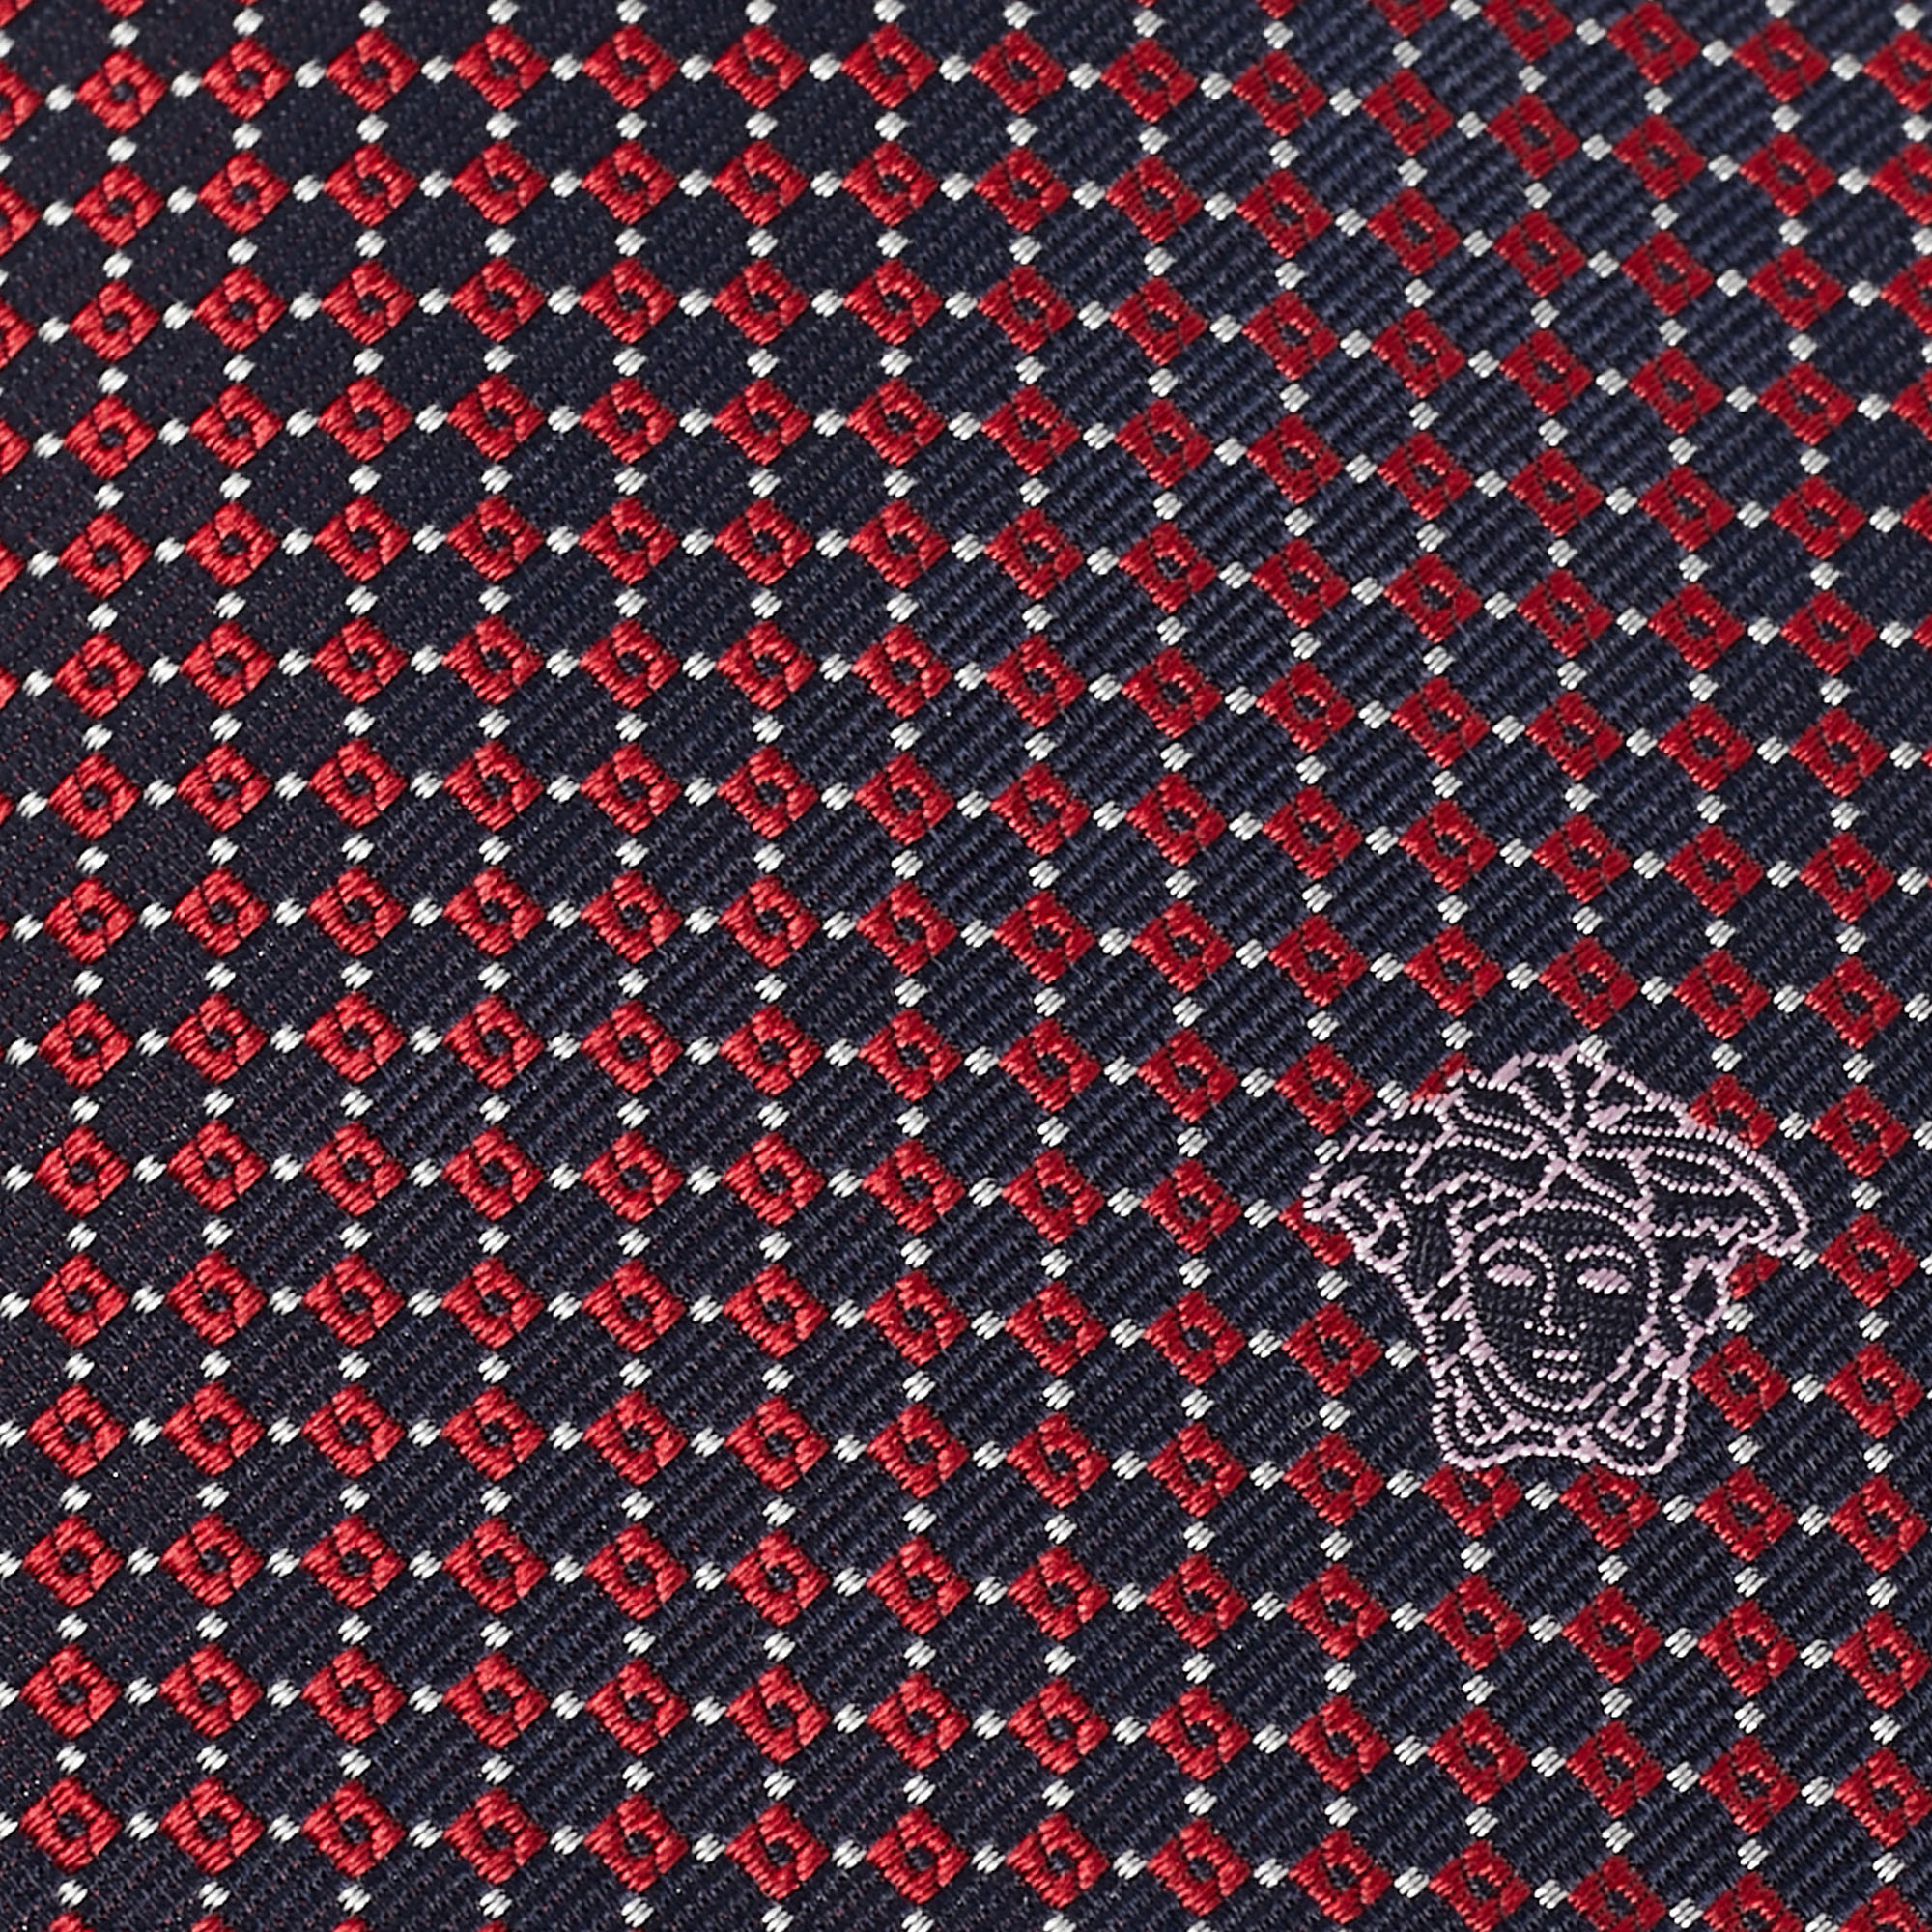 

Versace Navy Blue/Red Patterned Jacquard Silk Tie